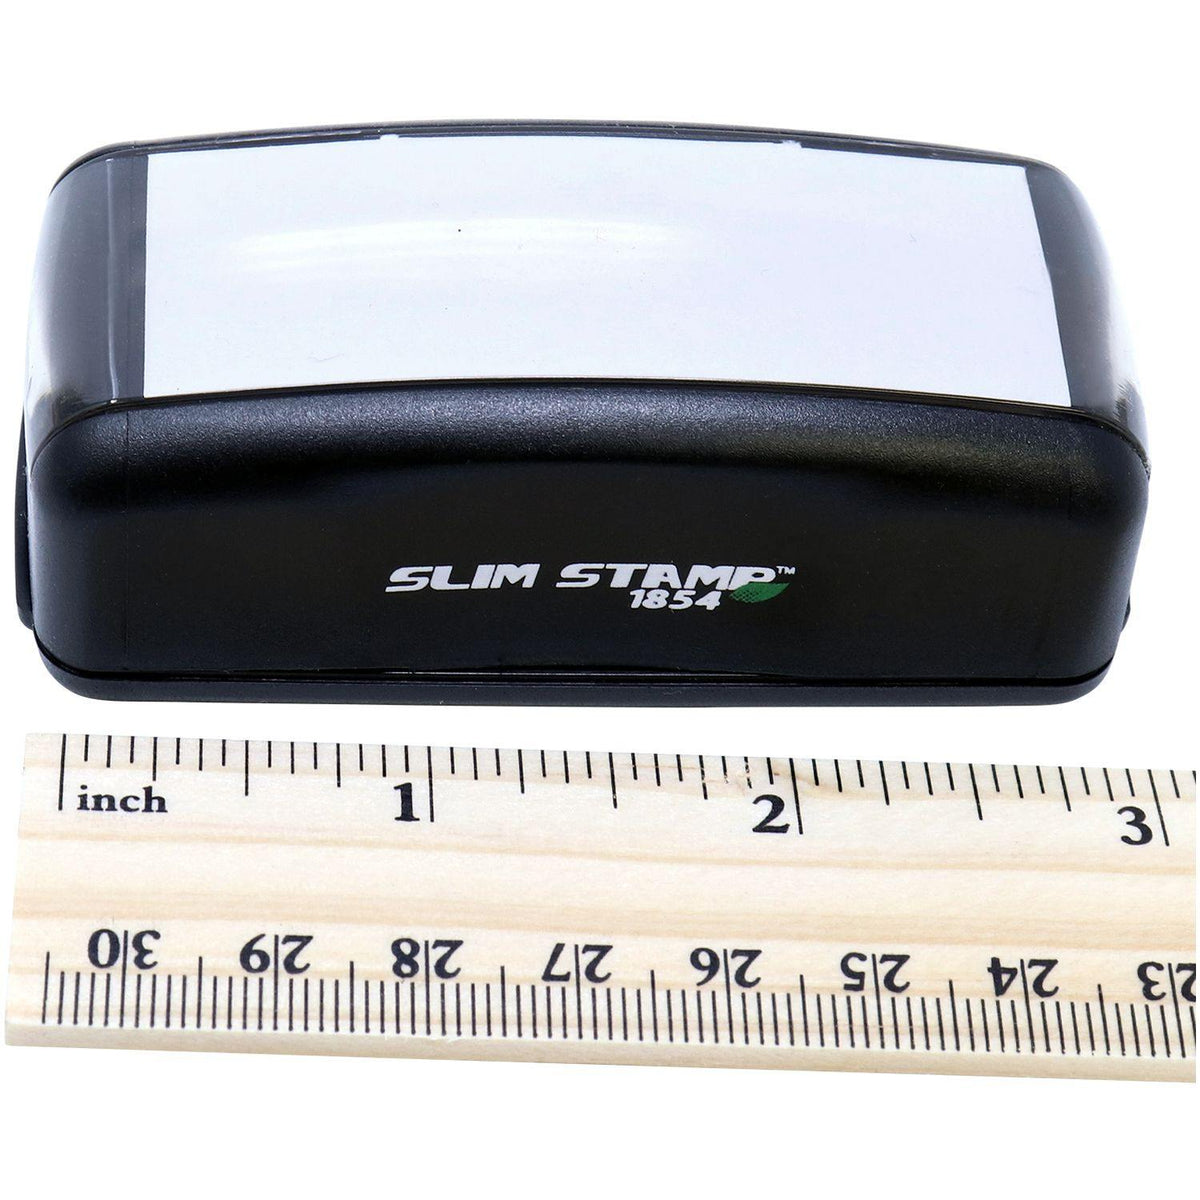 Measurement Large Pre-Inked Narrow Font Confidential Stamp with Ruler